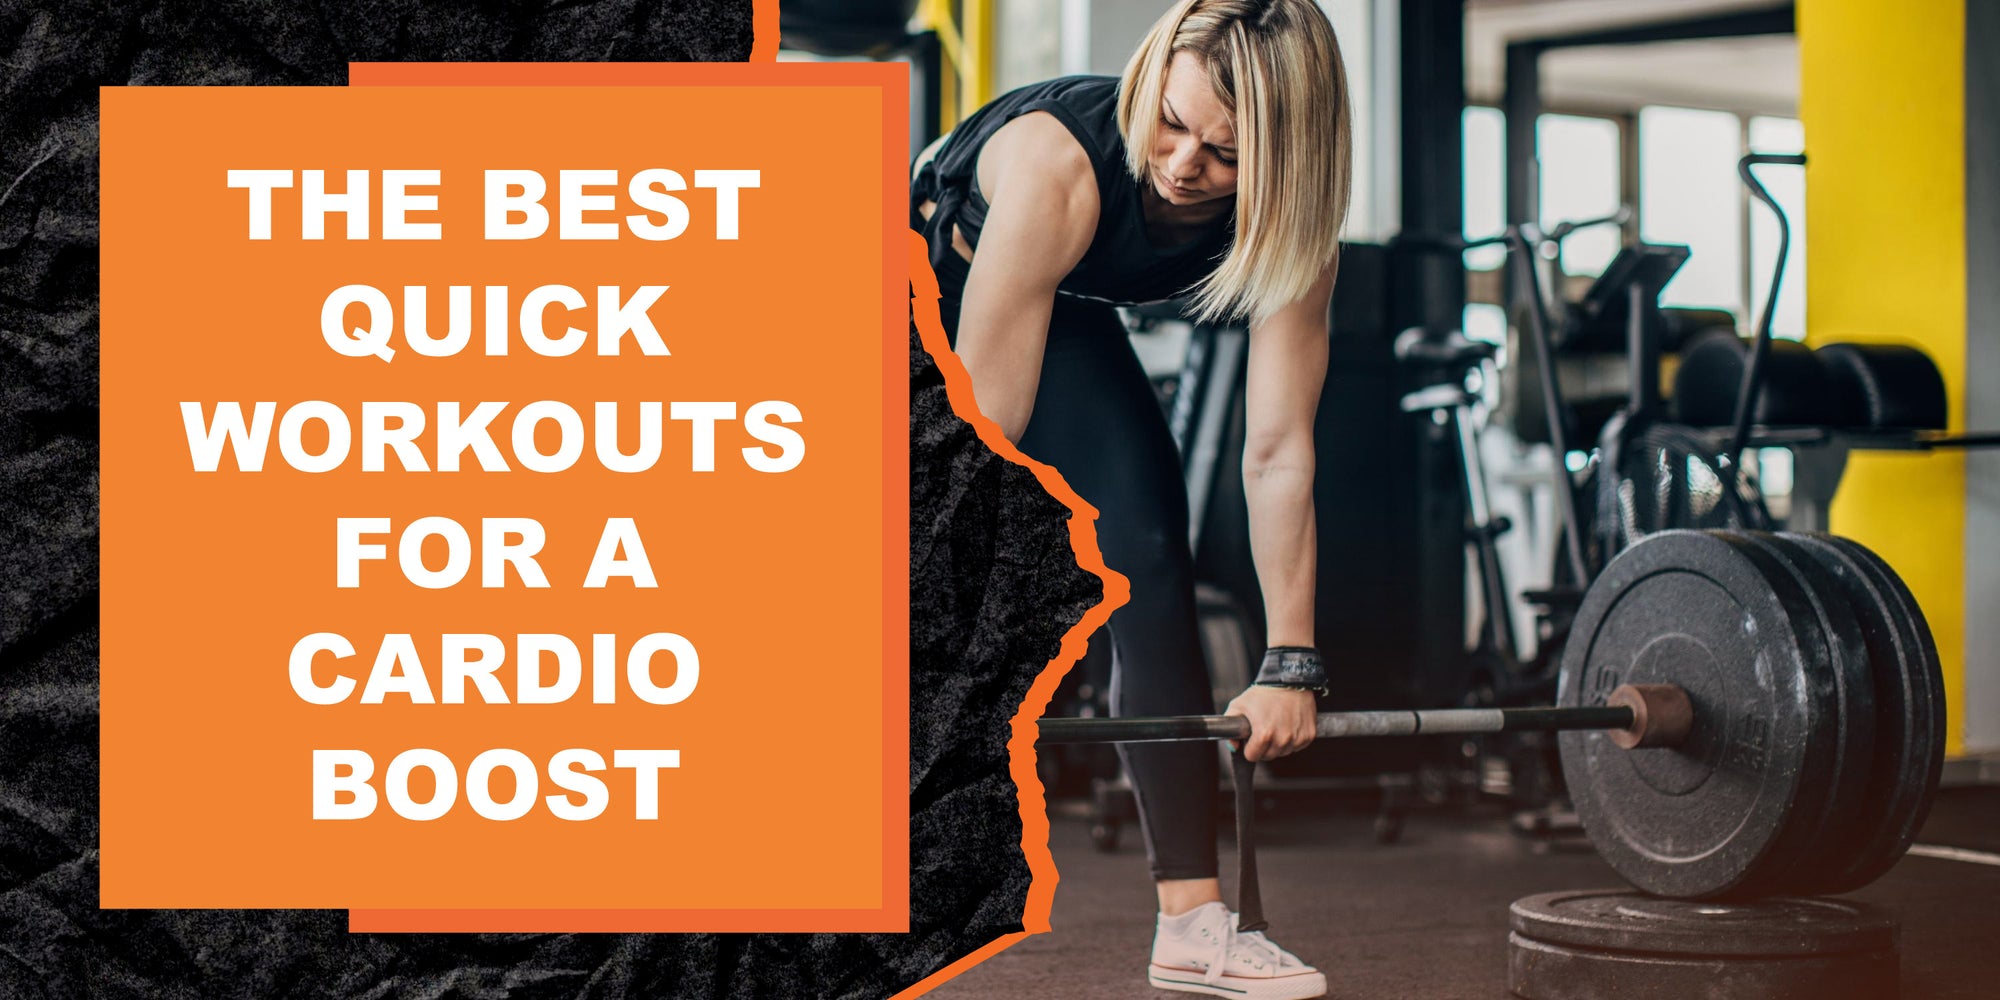 The Best Quick Workouts for a Cardio Boost